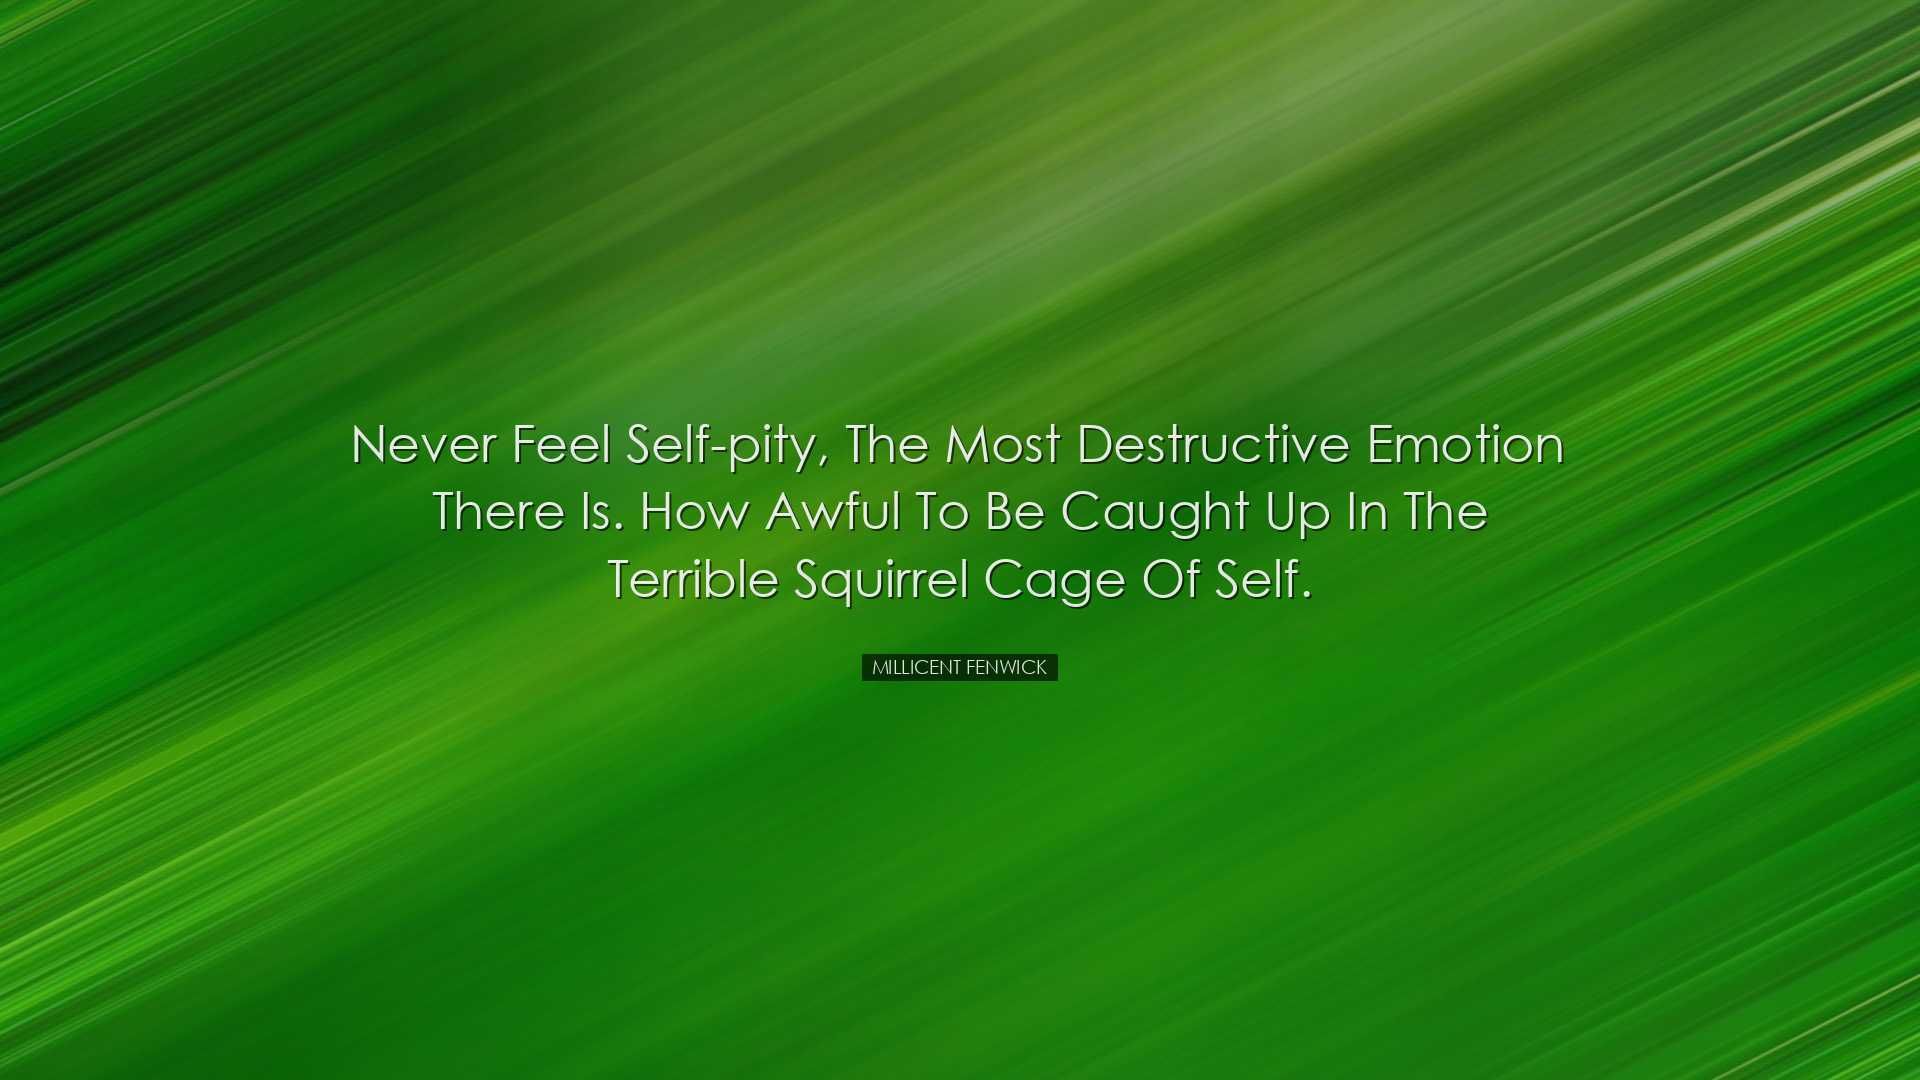 Never feel self-pity, the most destructive emotion there is. How a